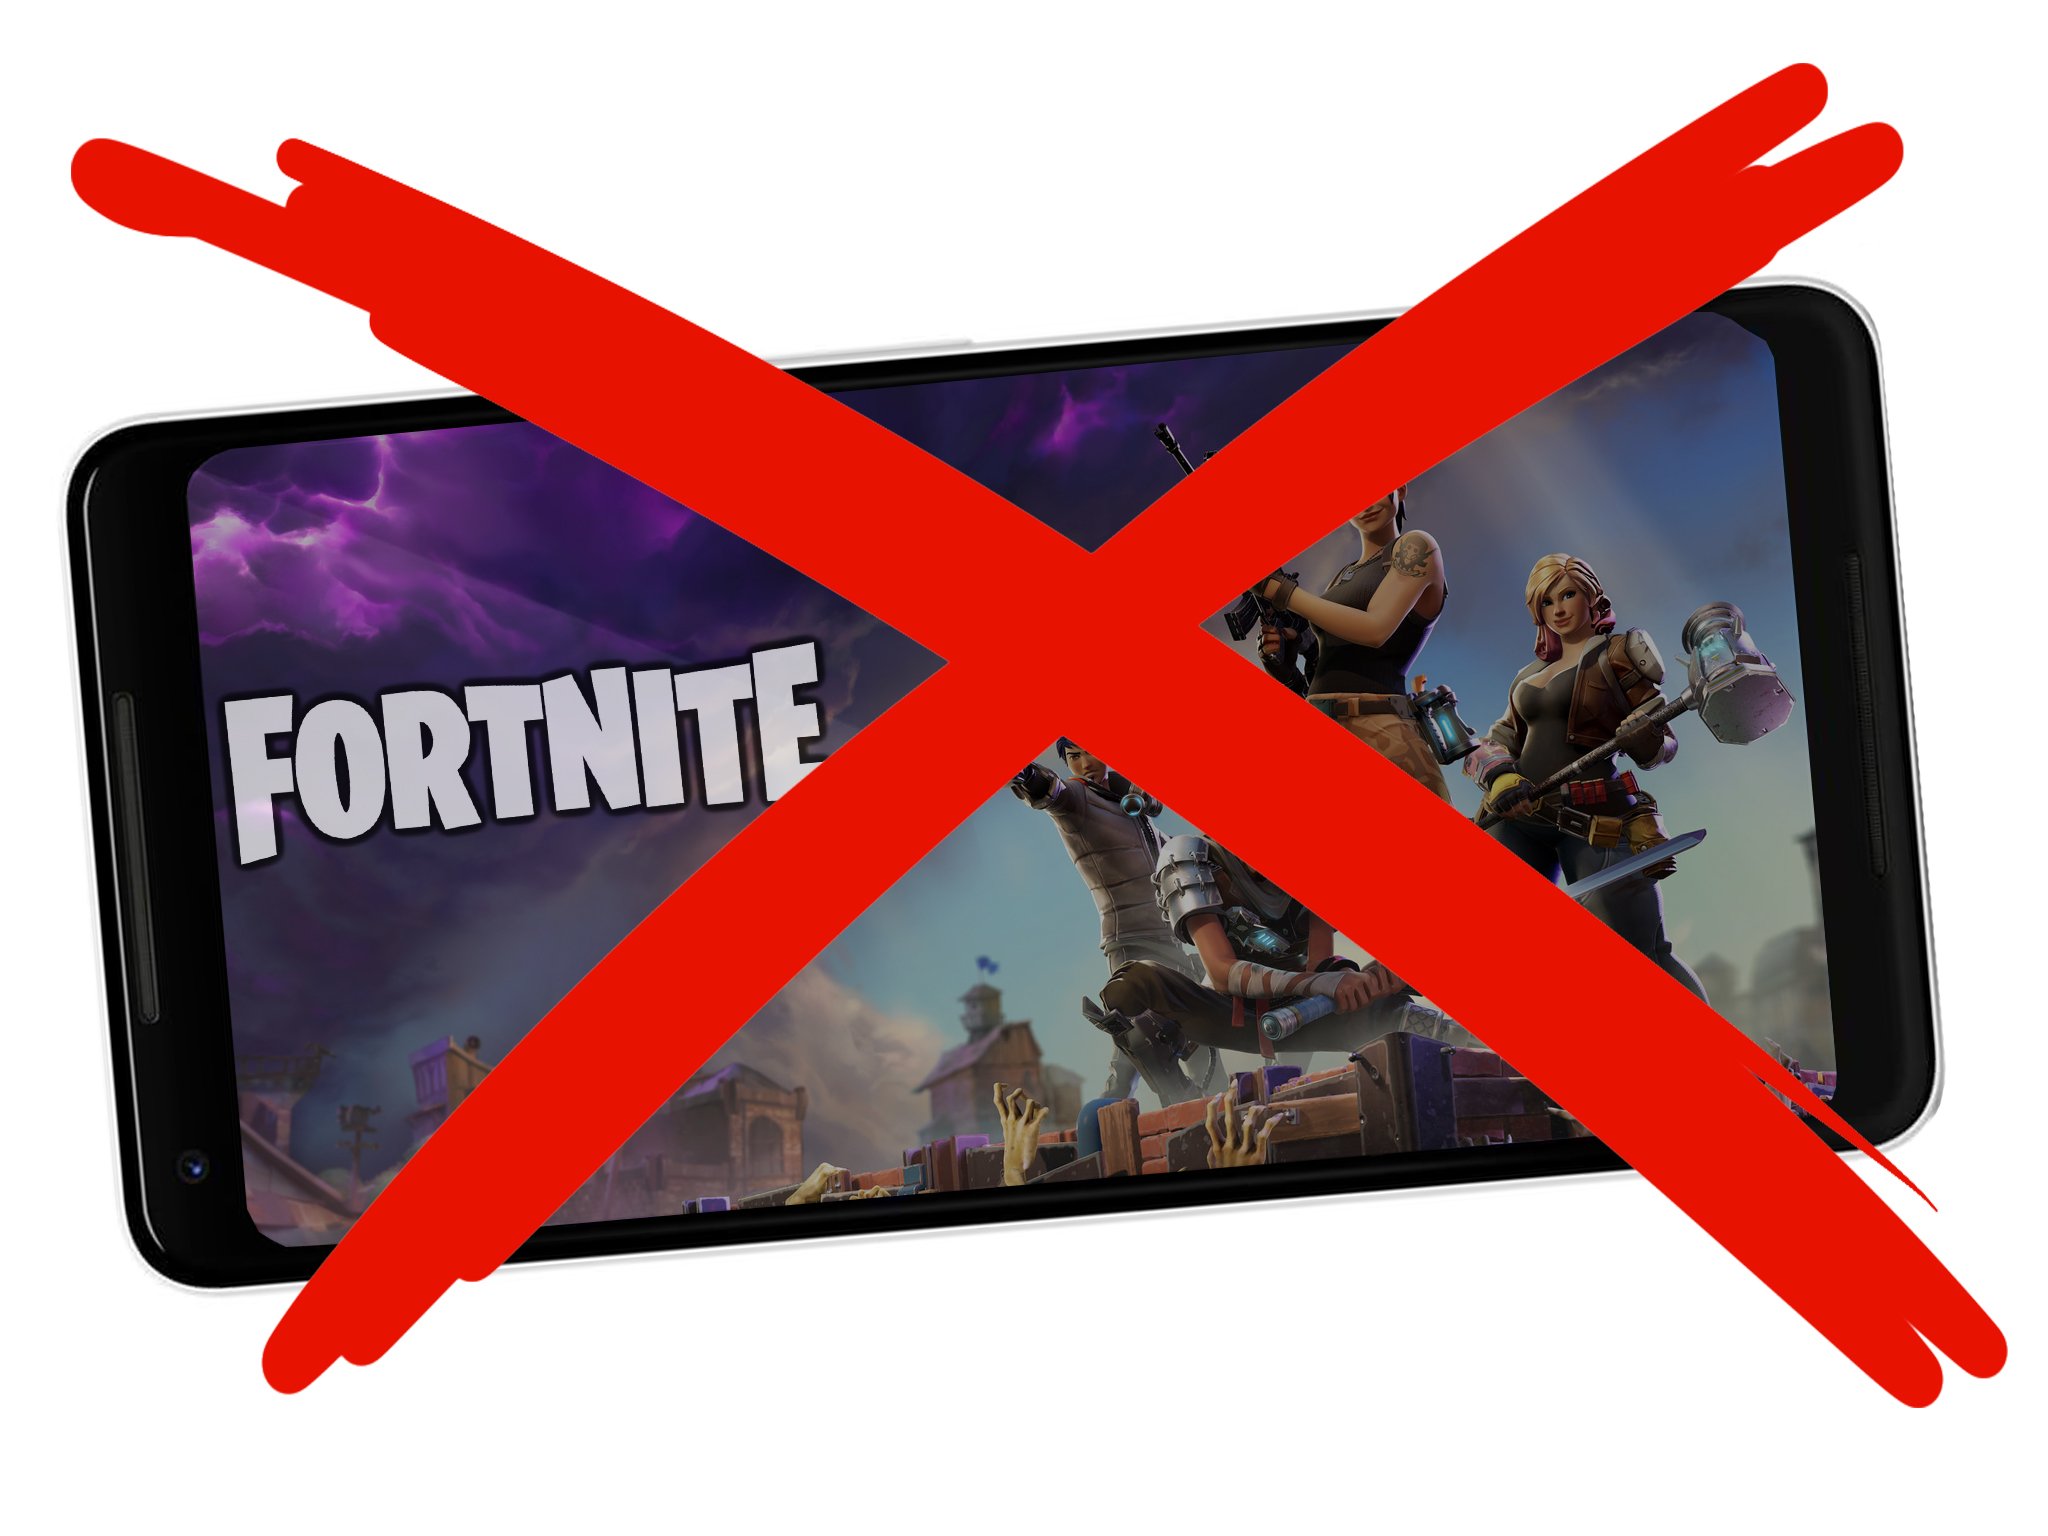 news of the massively popular and mostly free game fortnite coming to android has been causing buzz for months now gamers of every age group have flocked - fortnite stupid default